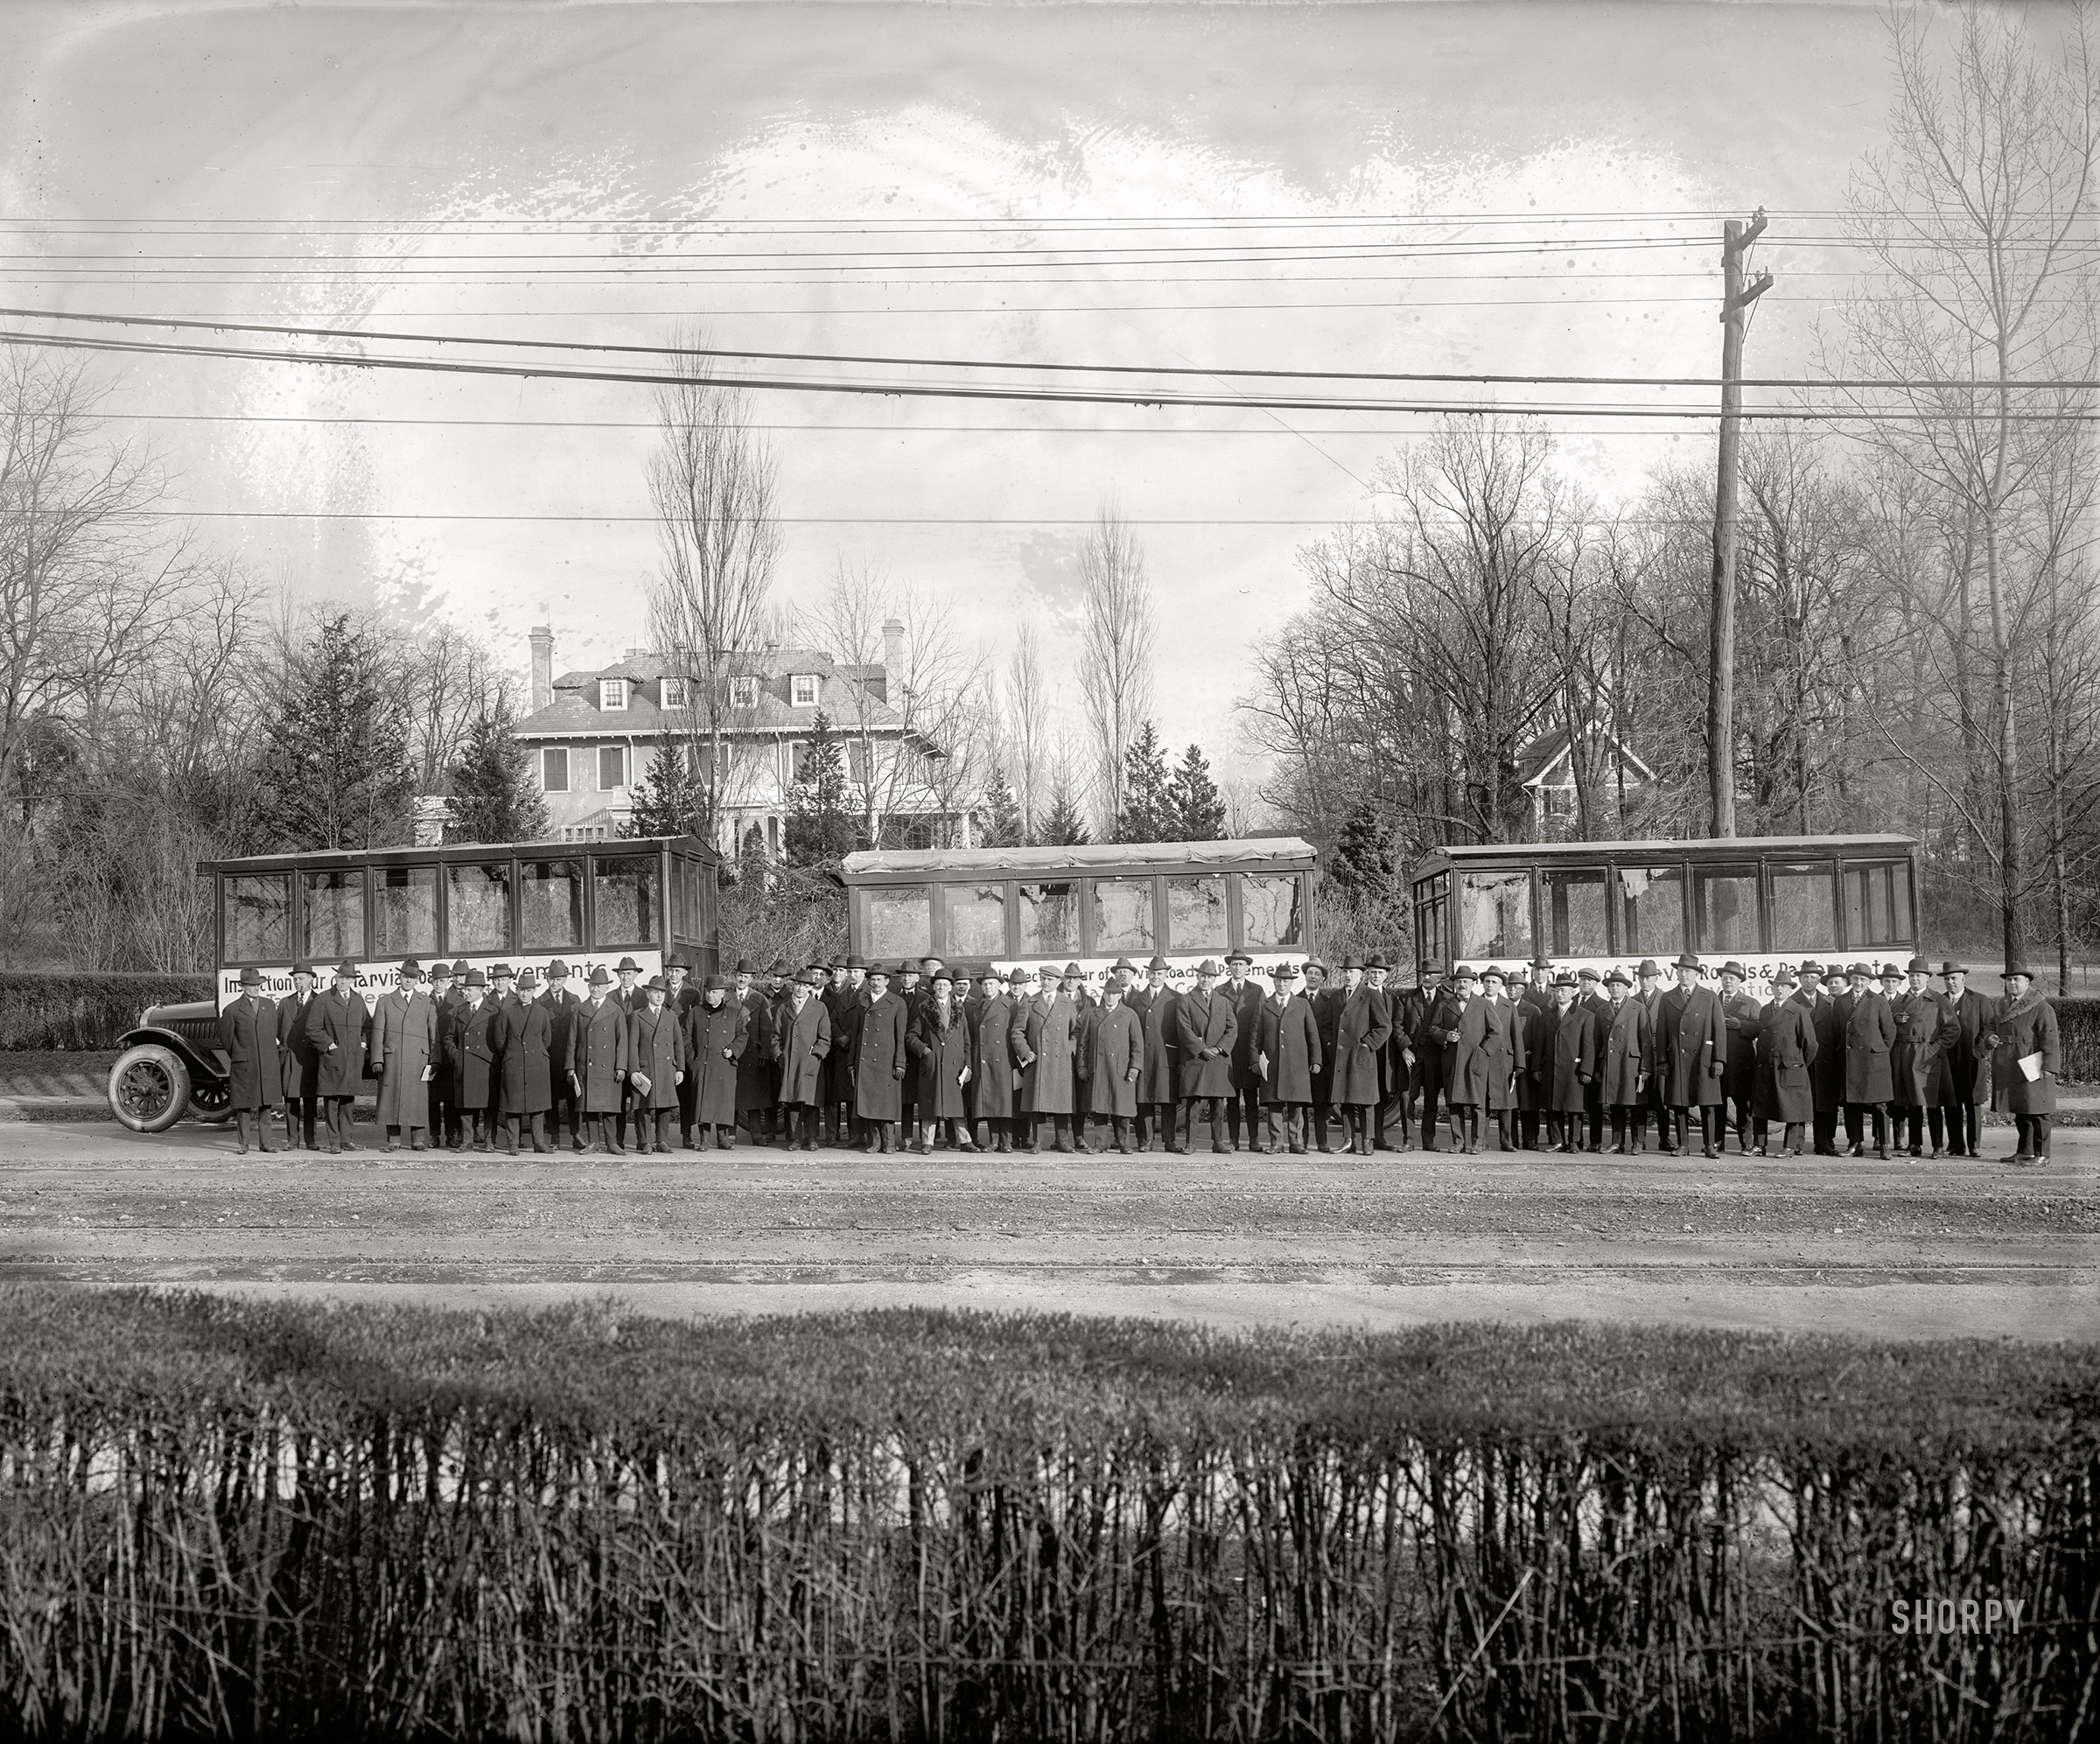 Washington, D.C., circa 1921. "Barrett Co. group -- Inspection tour of Tarvia roads & pavements." National Photo Company Collection glass negative. View full size.